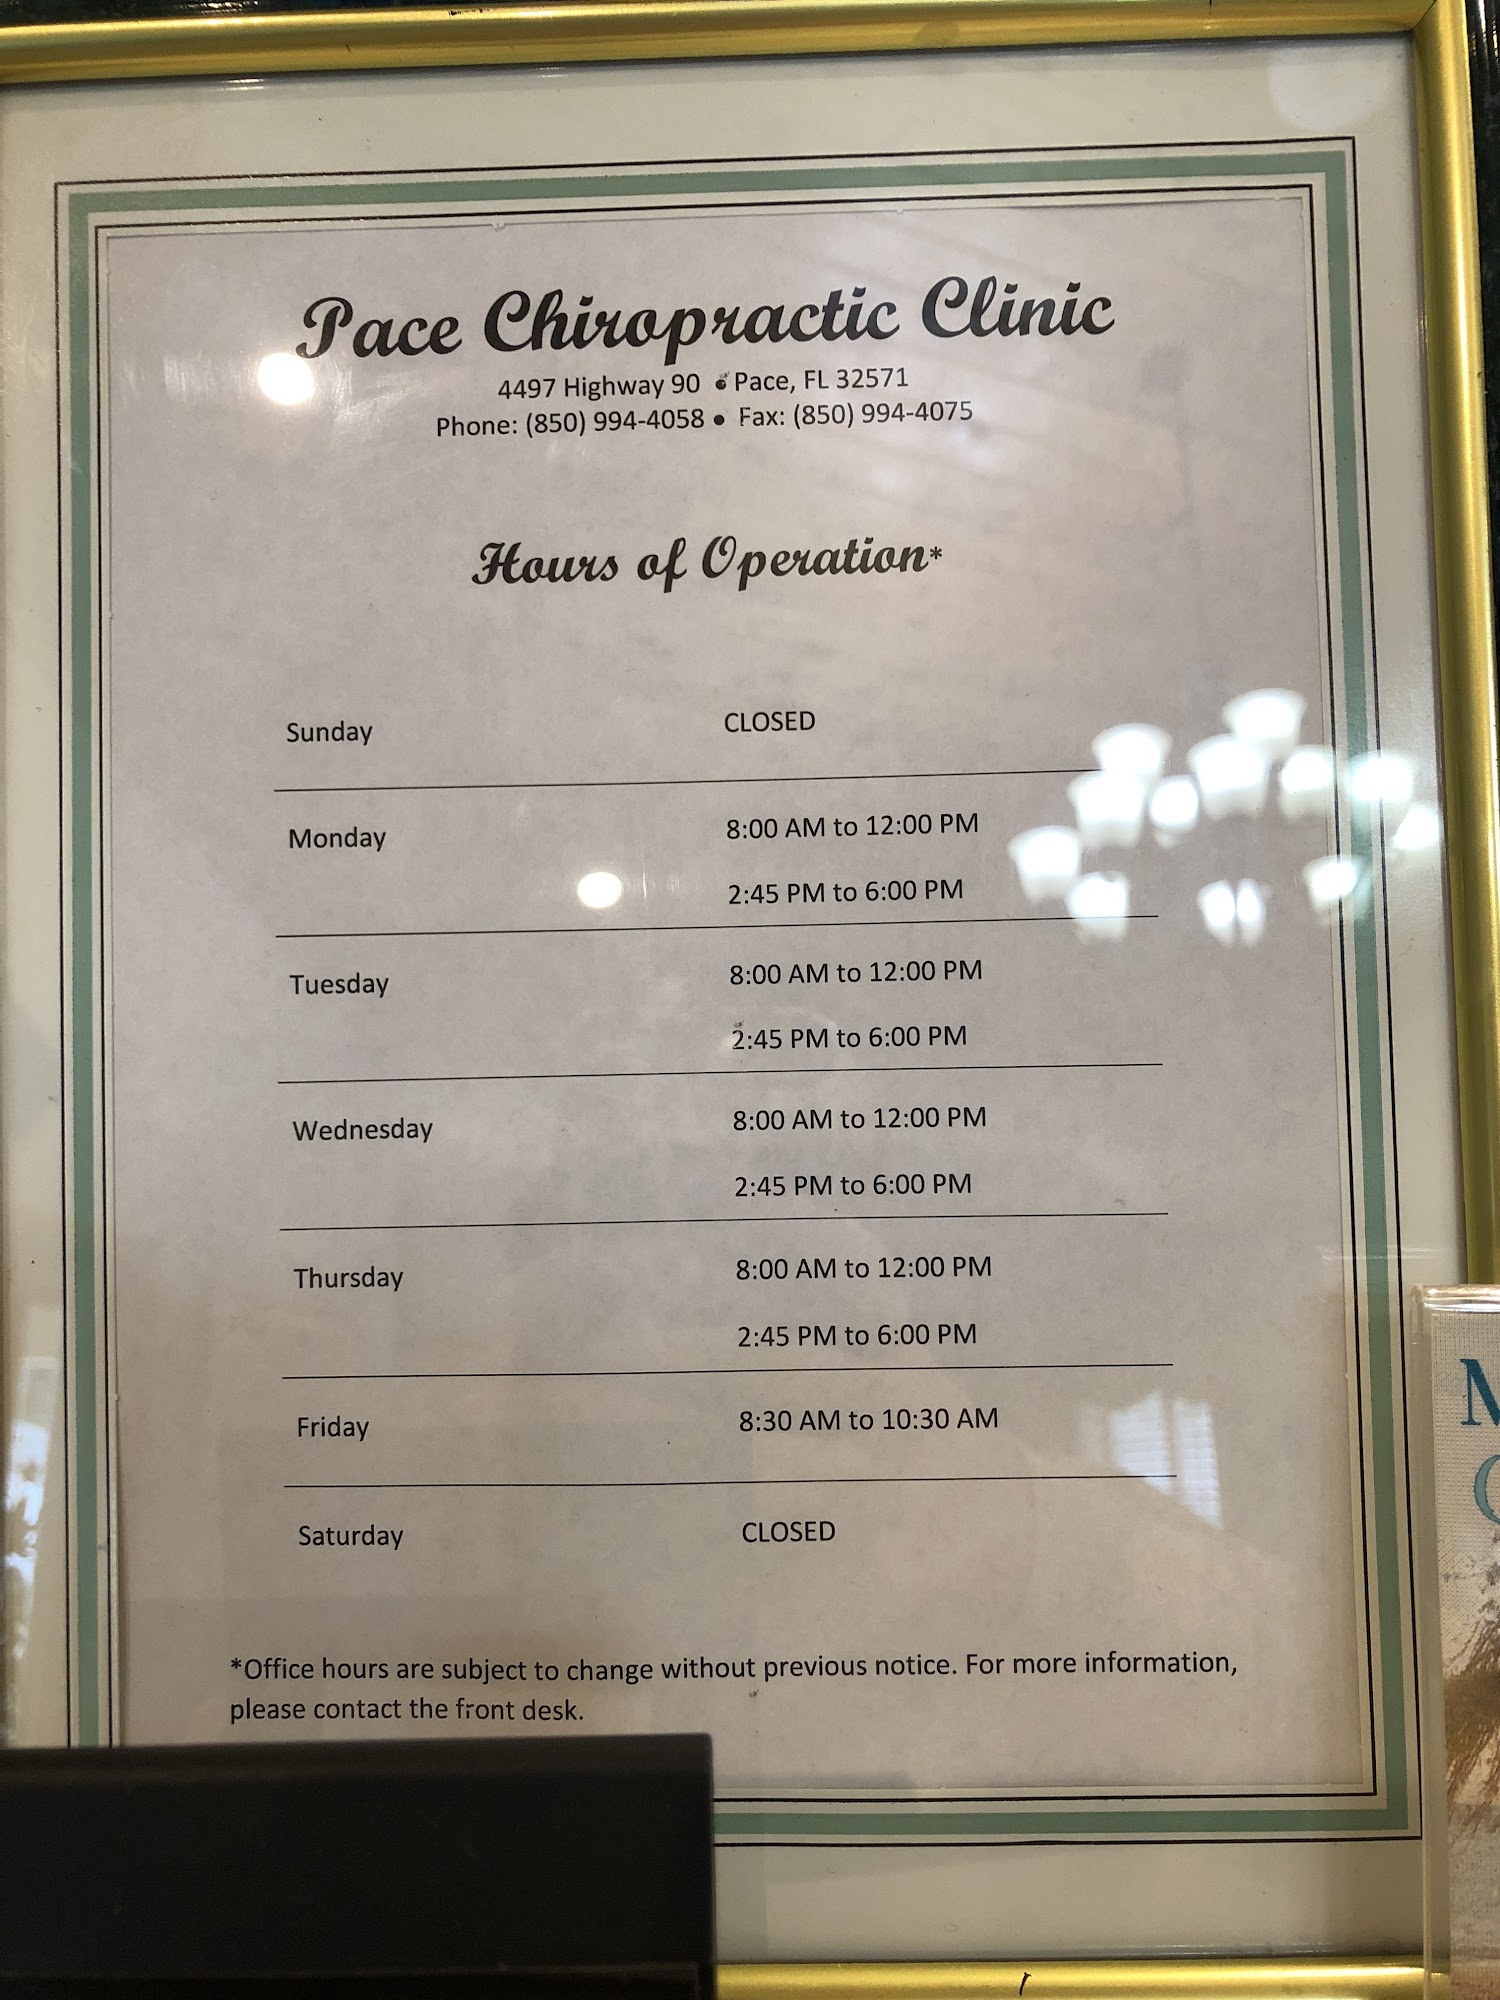 Pace Chiropractic Clinic